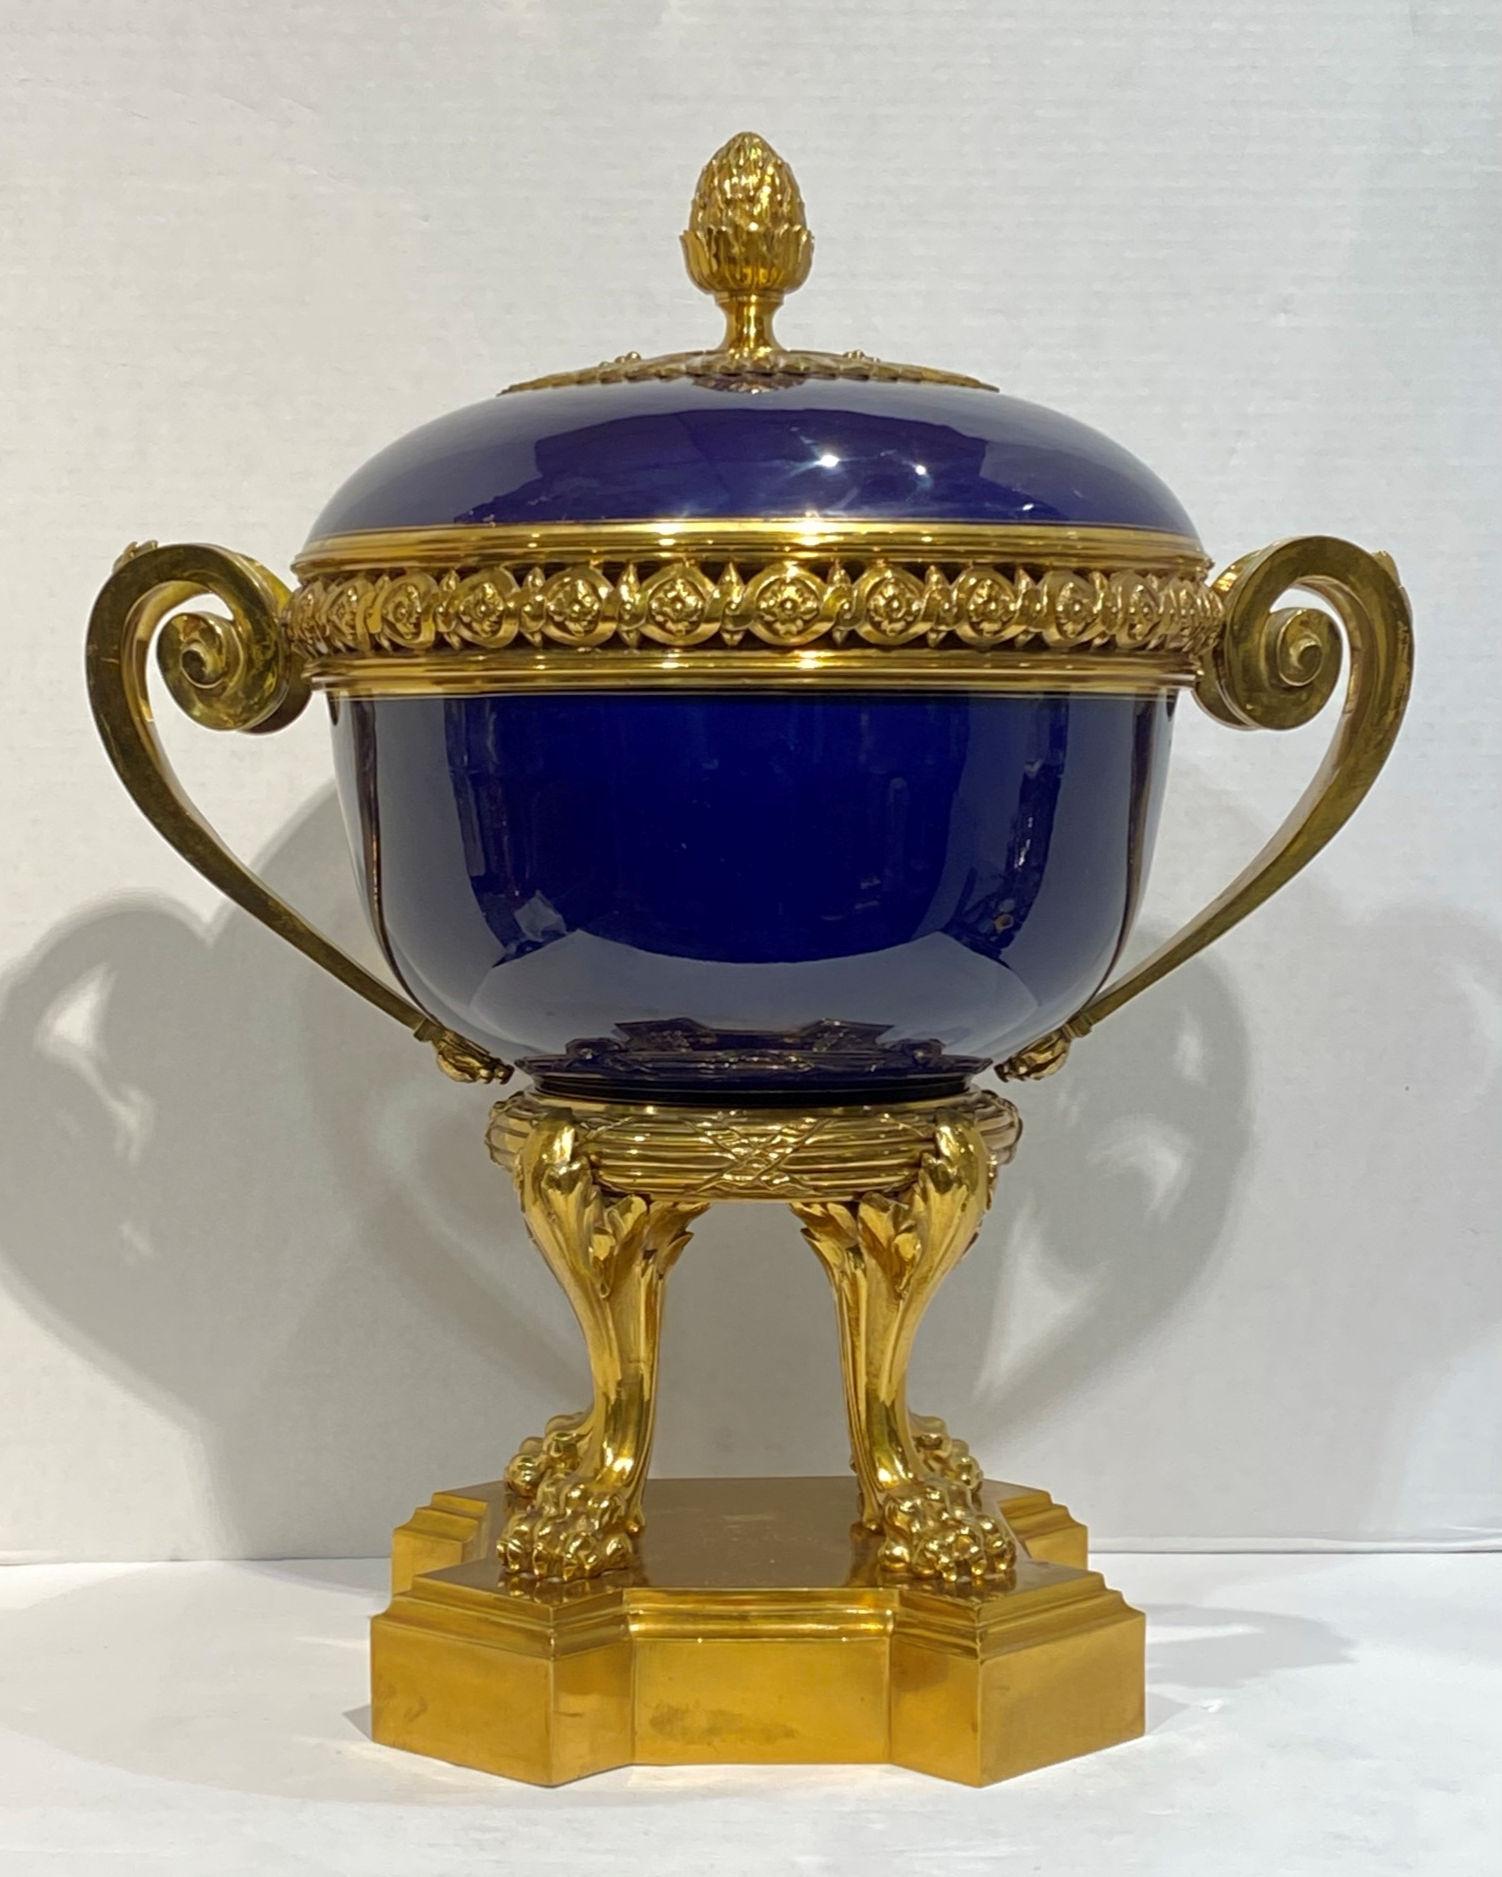 A Sevres style gilt bronze-mounted porcelain cache pot of ovoid form with monochrome cobalt finish, raised on four paw feet.
Measuring width over handles is 17 1/4 inches.